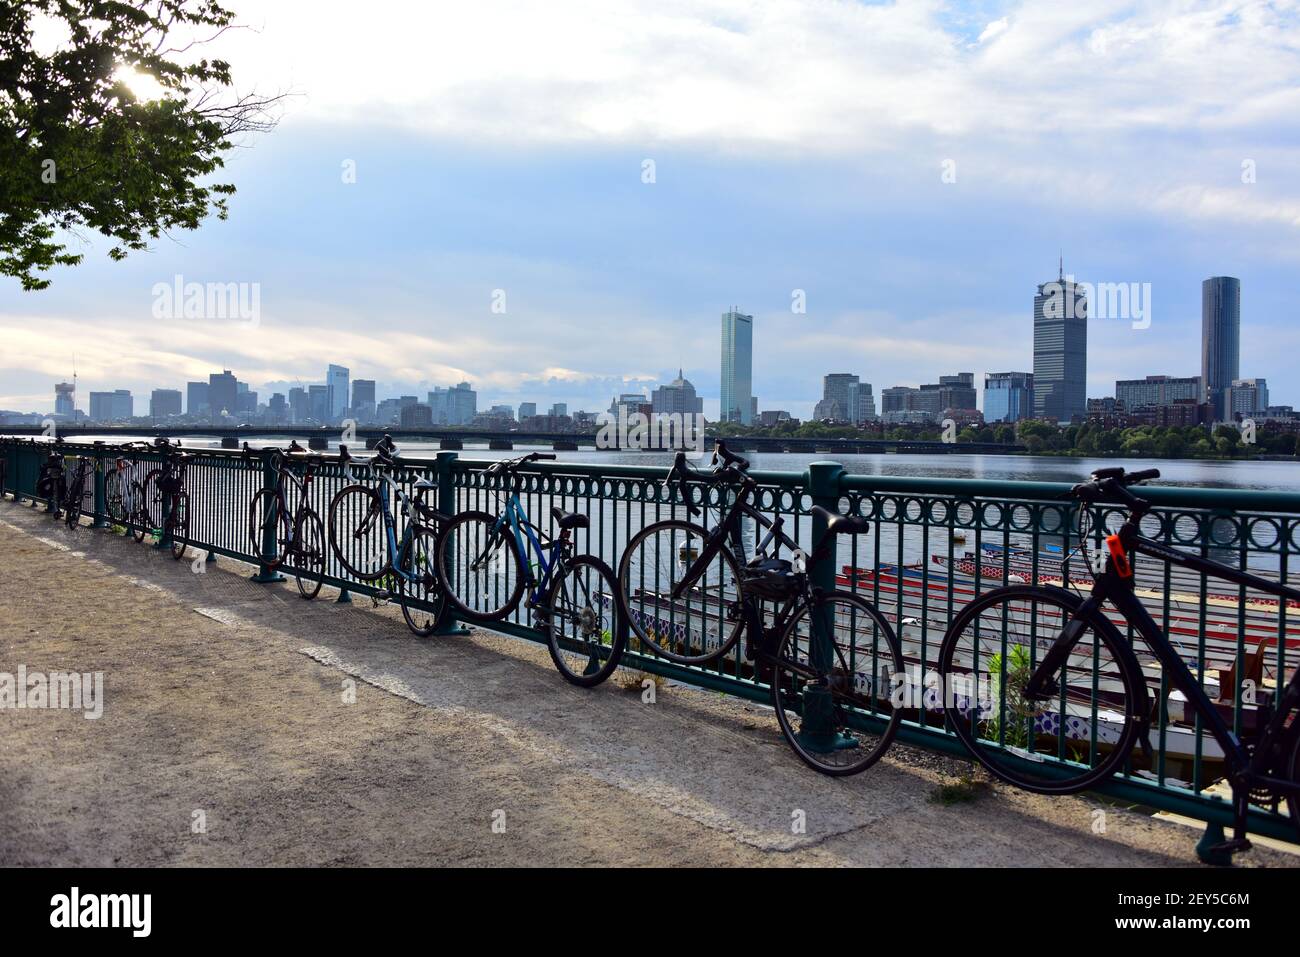 View over the River Charles with the Boston skyline in the background and bicycles in the foreground alon the railing. Stock Photo